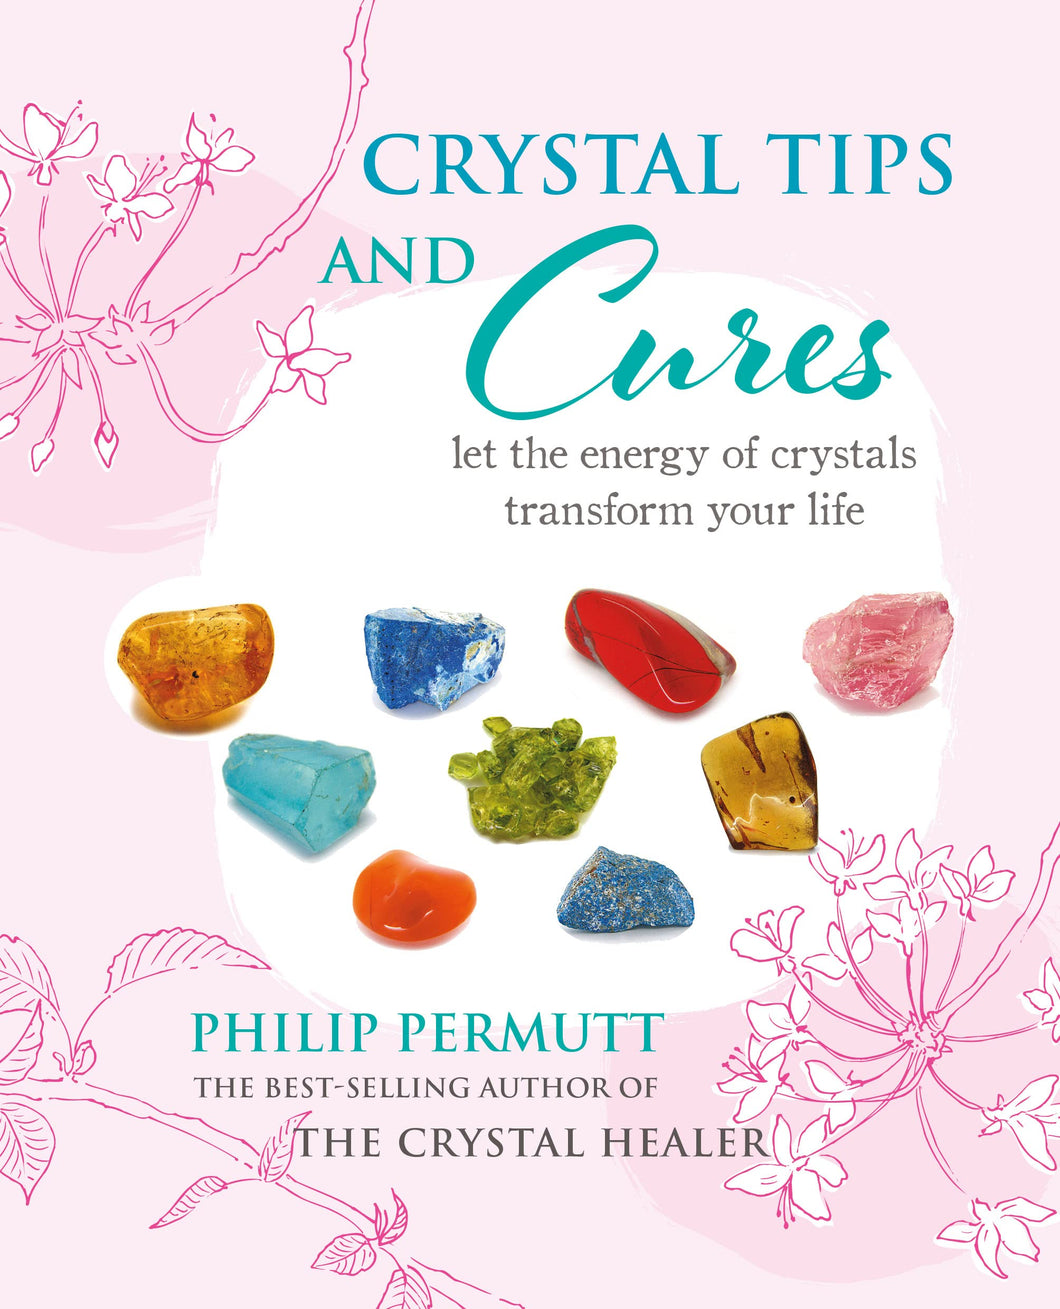 Crystal Tips and Cures: Let the energy of crystals transform your life